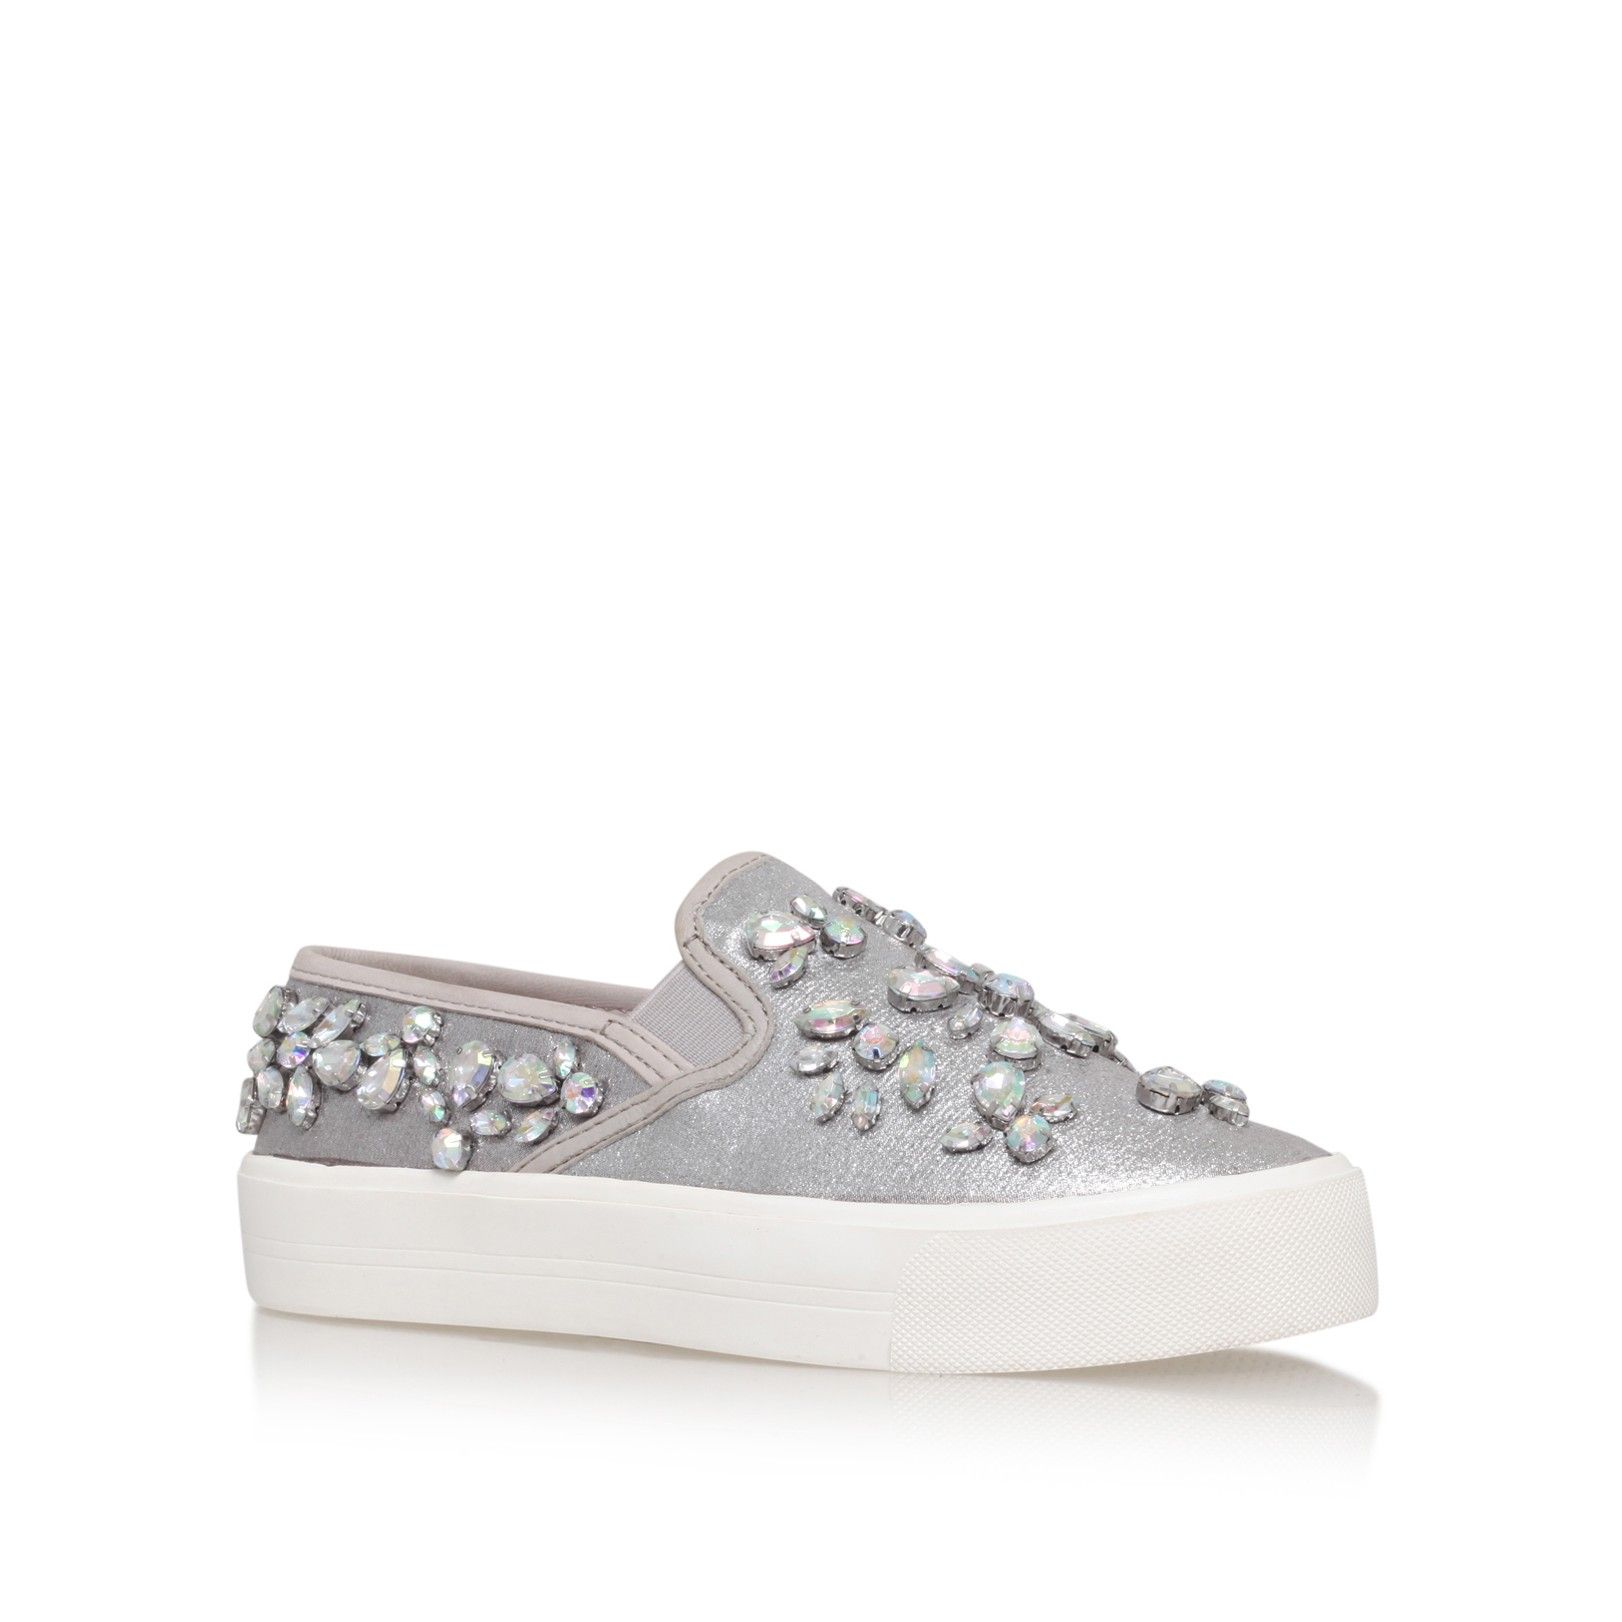 20 pairs of shiny silver trainers to 